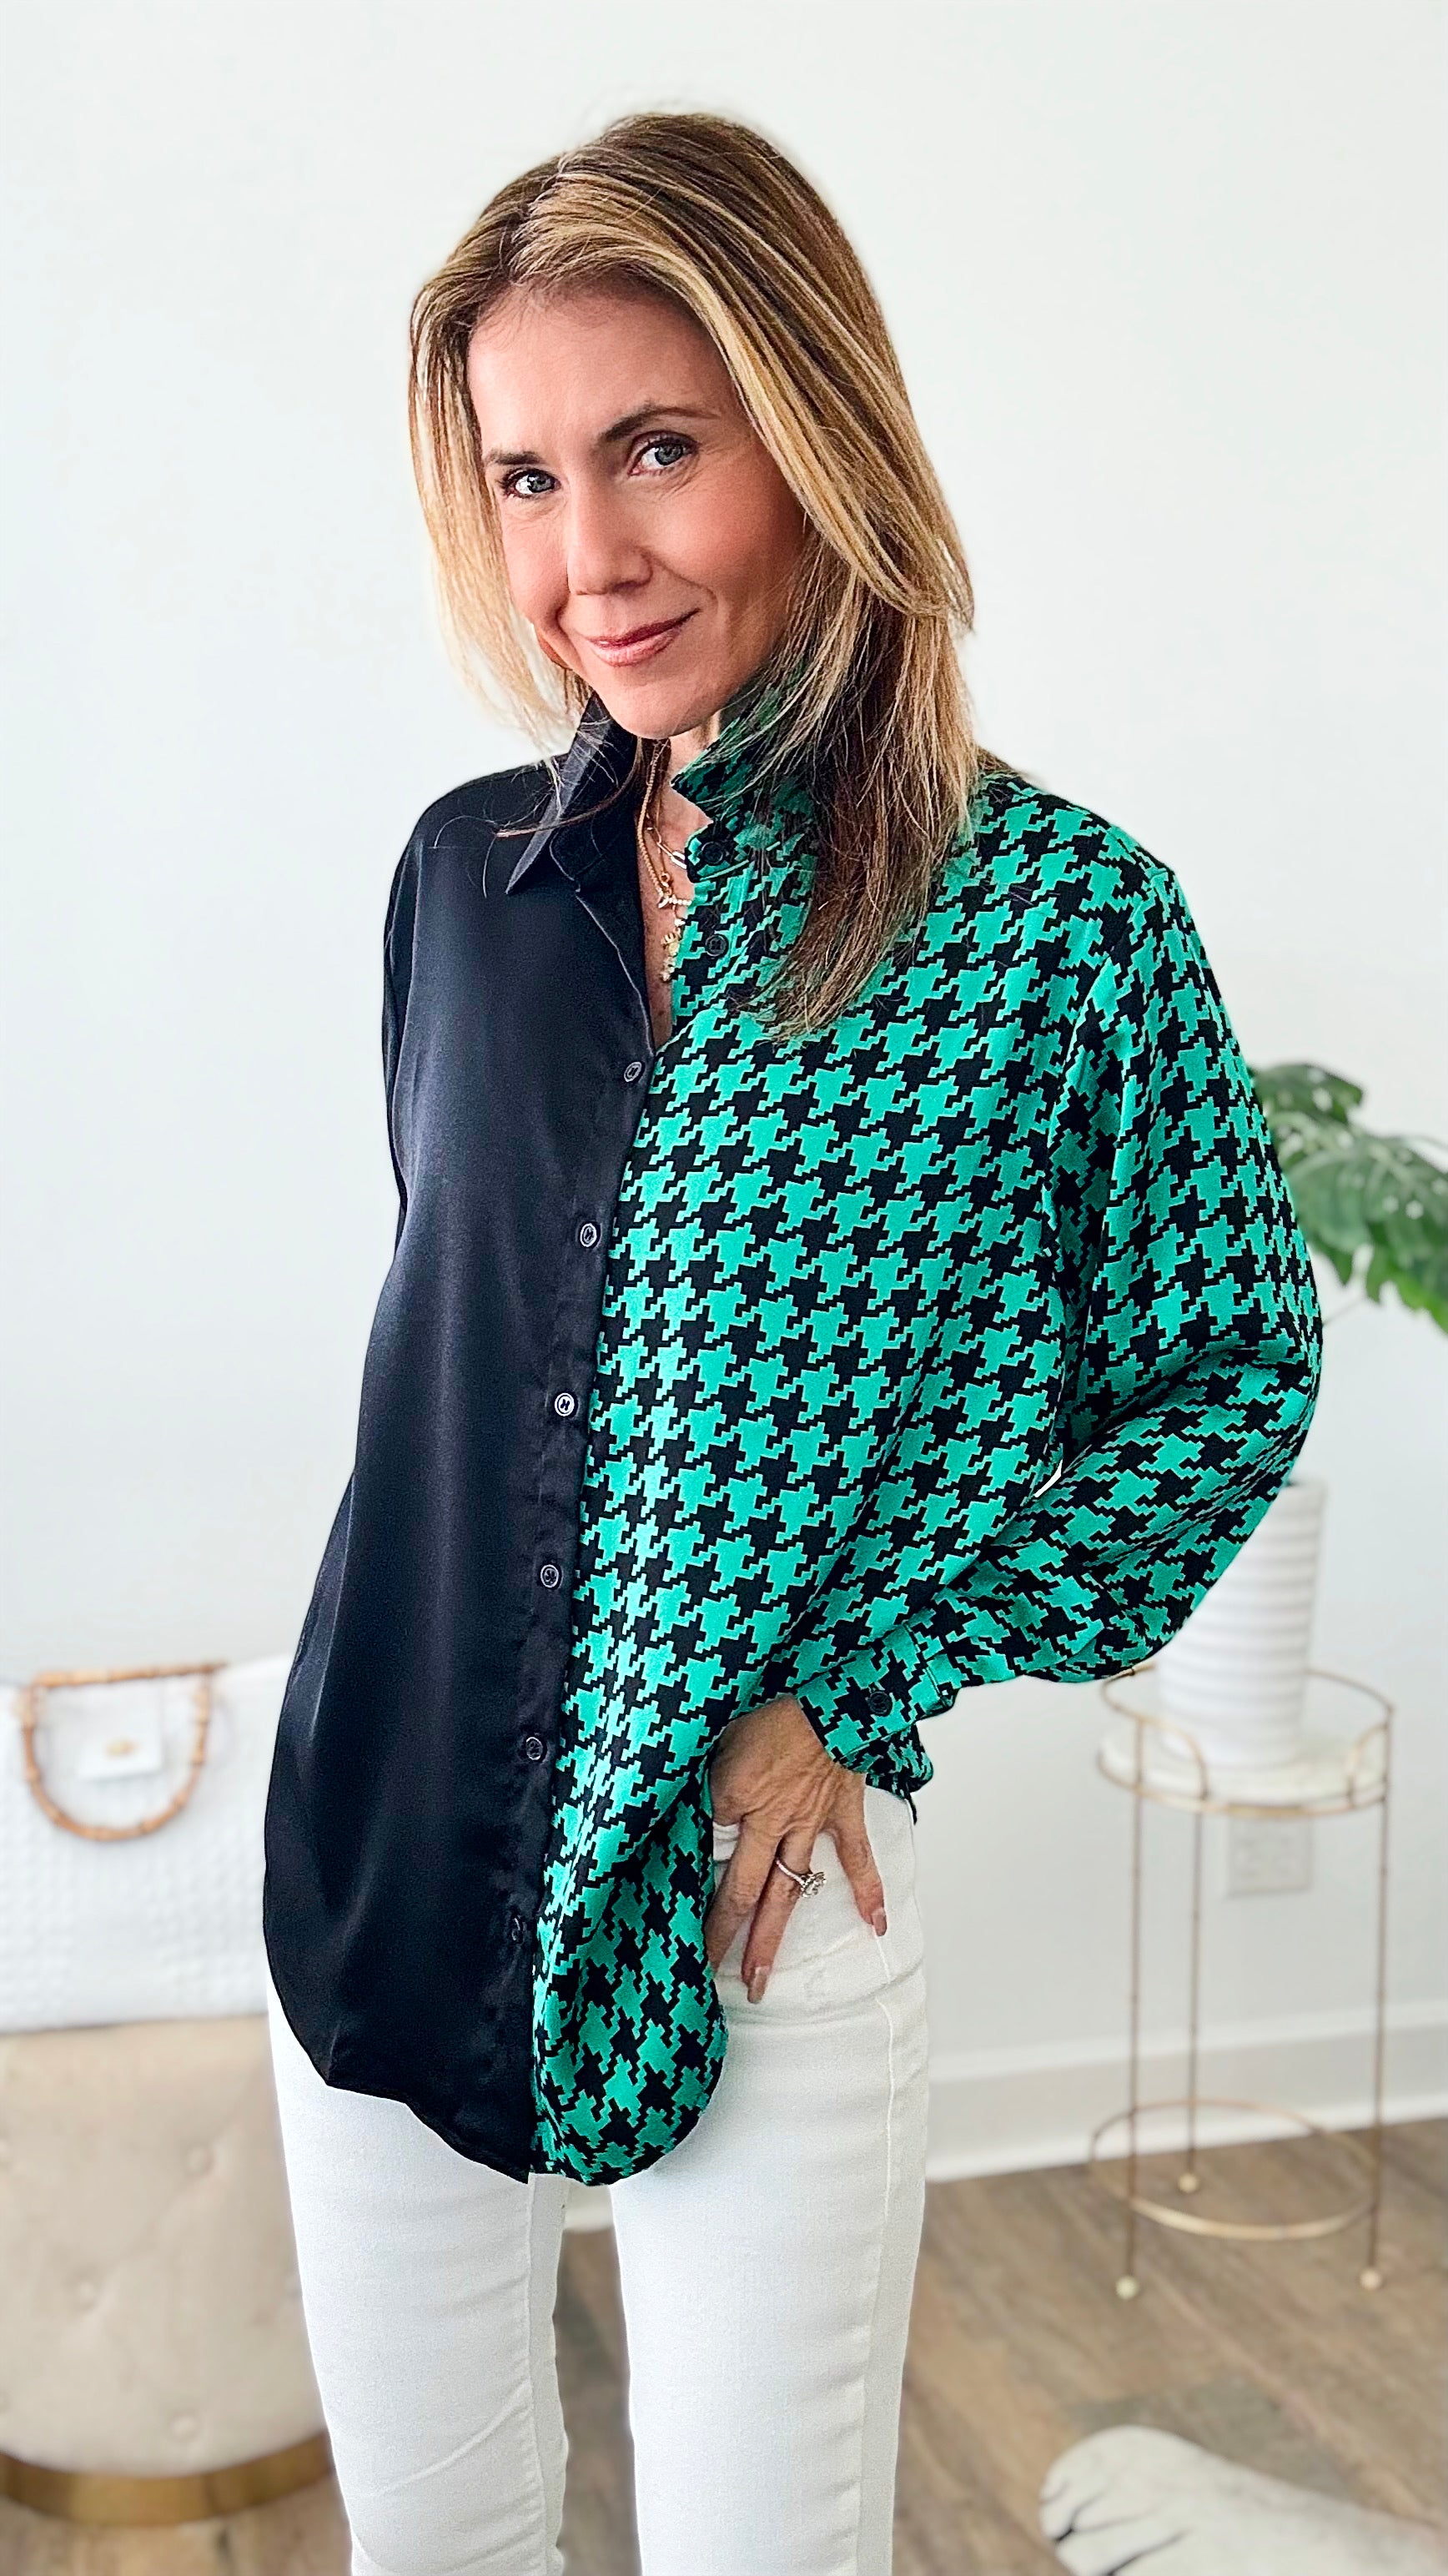 Houndstooth Mix Print Shirt - Kelly Green/ Black-110 Short Sleeve Tops-EESOME-Coastal Bloom Boutique, find the trendiest versions of the popular styles and looks Located in Indialantic, FL